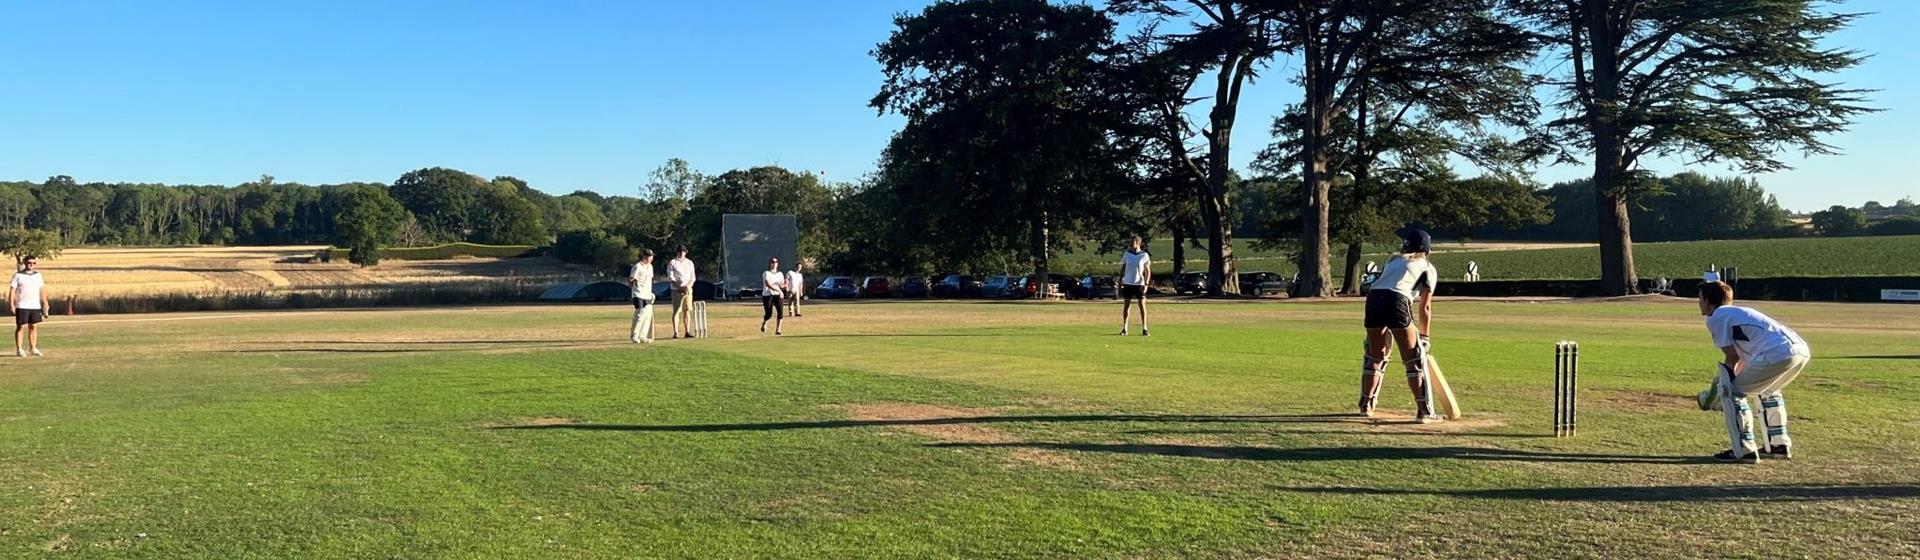 Brown&Co take on Leathes Prior at cricket